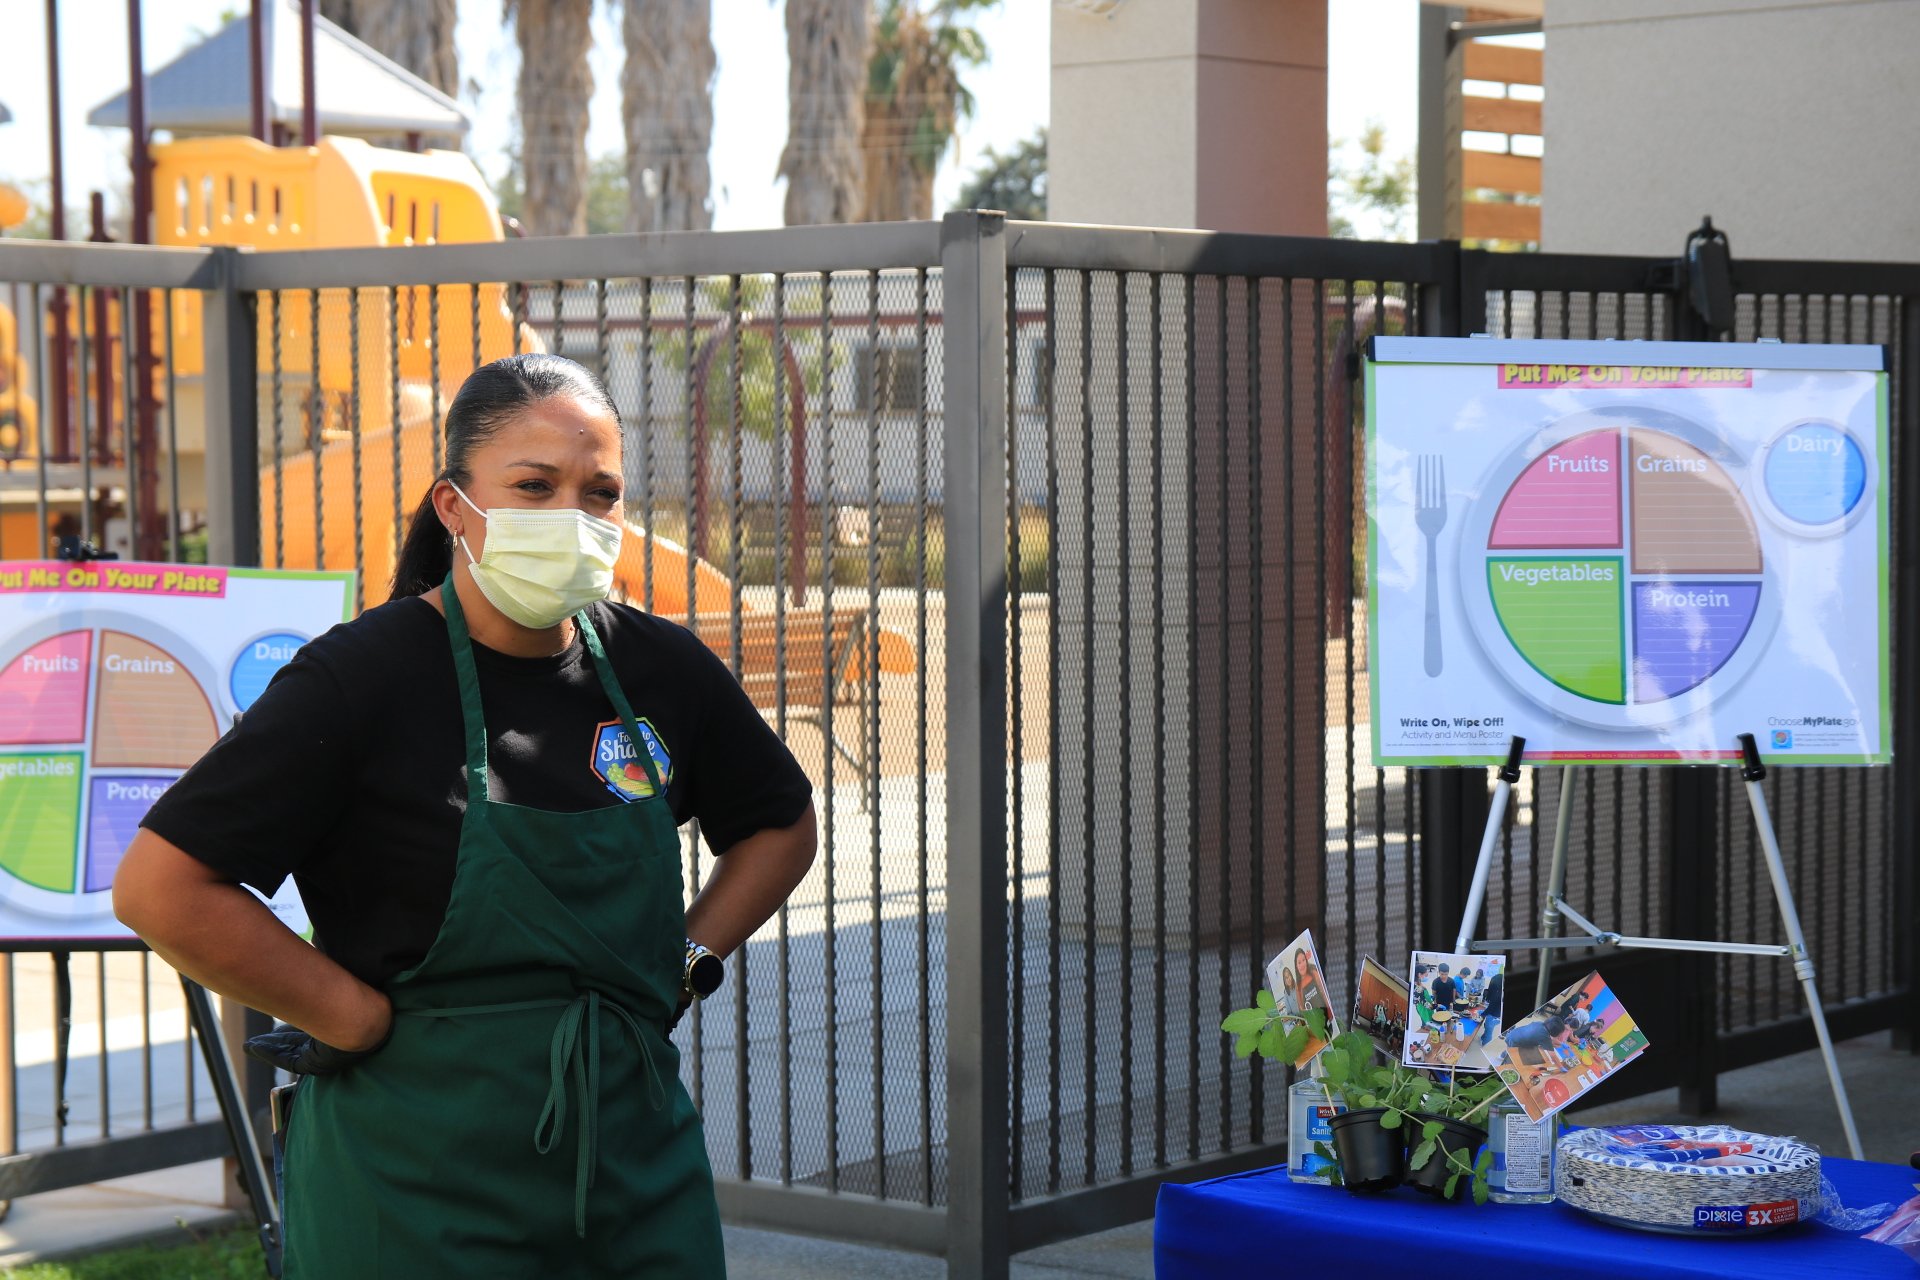 A Metro staff member speaks with Healthy Futures staff during a cooking class demonstration